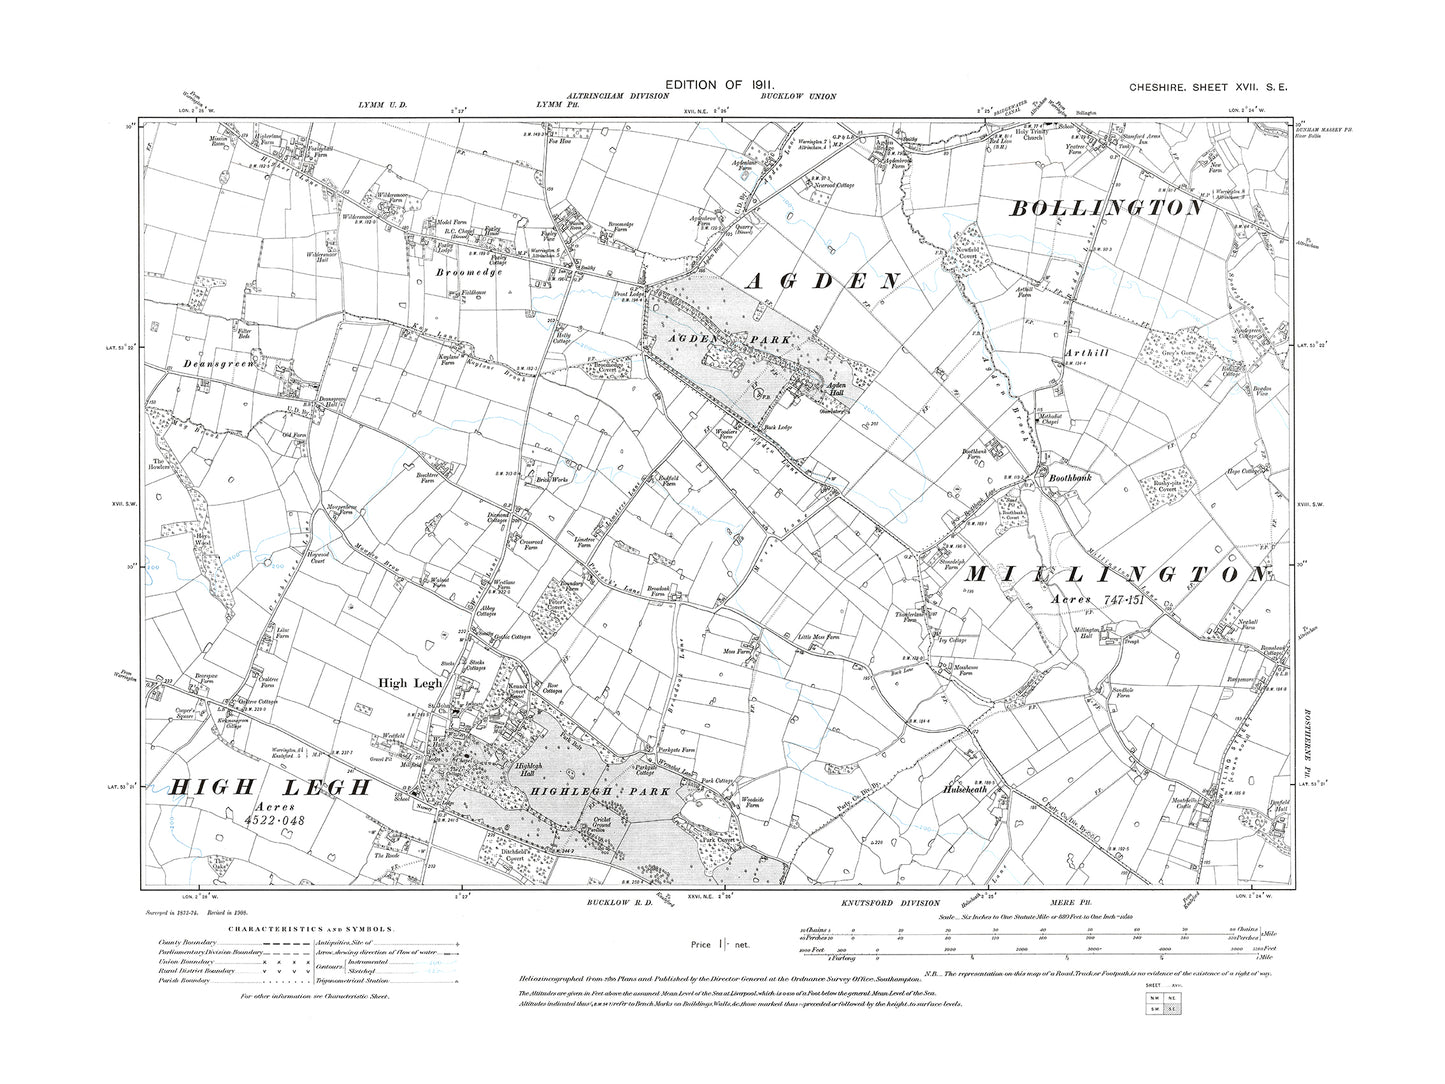 Old OS map dated 1911, showing Bollington (south), High Legh, Deansgreen, Broomedge in Cheshire 17SE